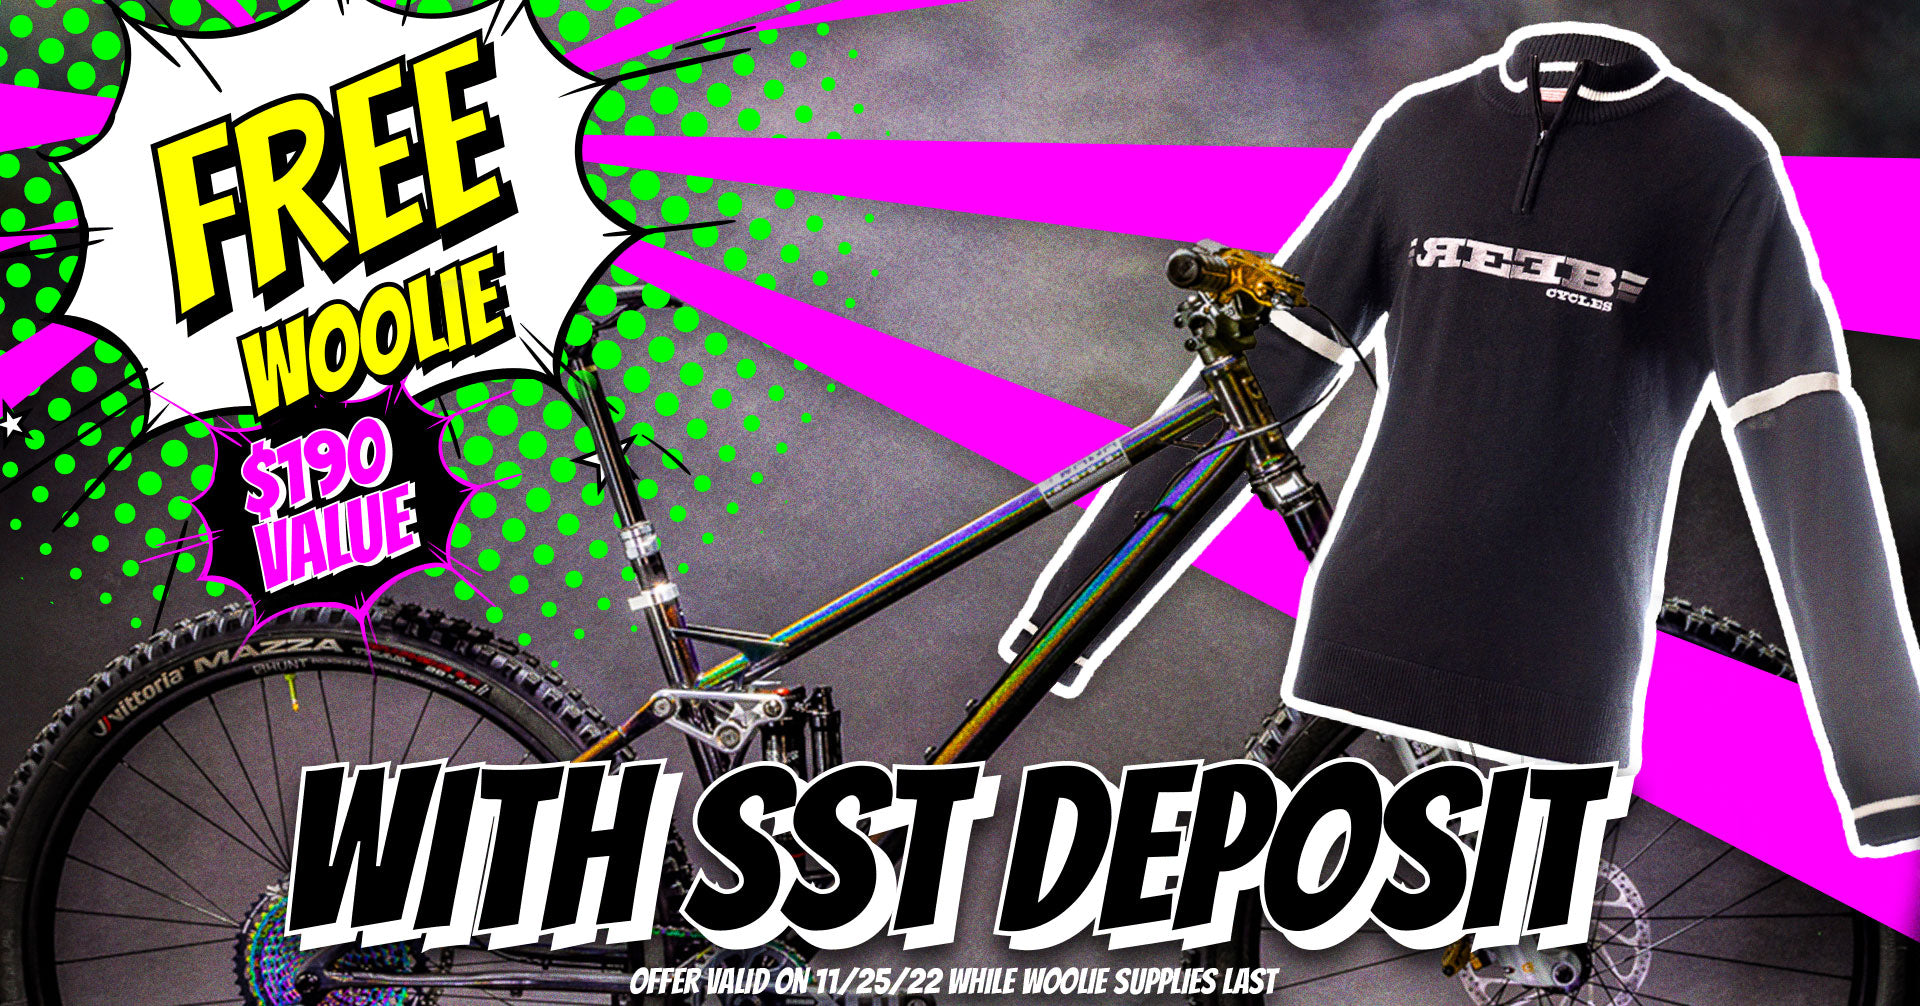 Black Friday Only :: FREE Woolie with SST Deposit